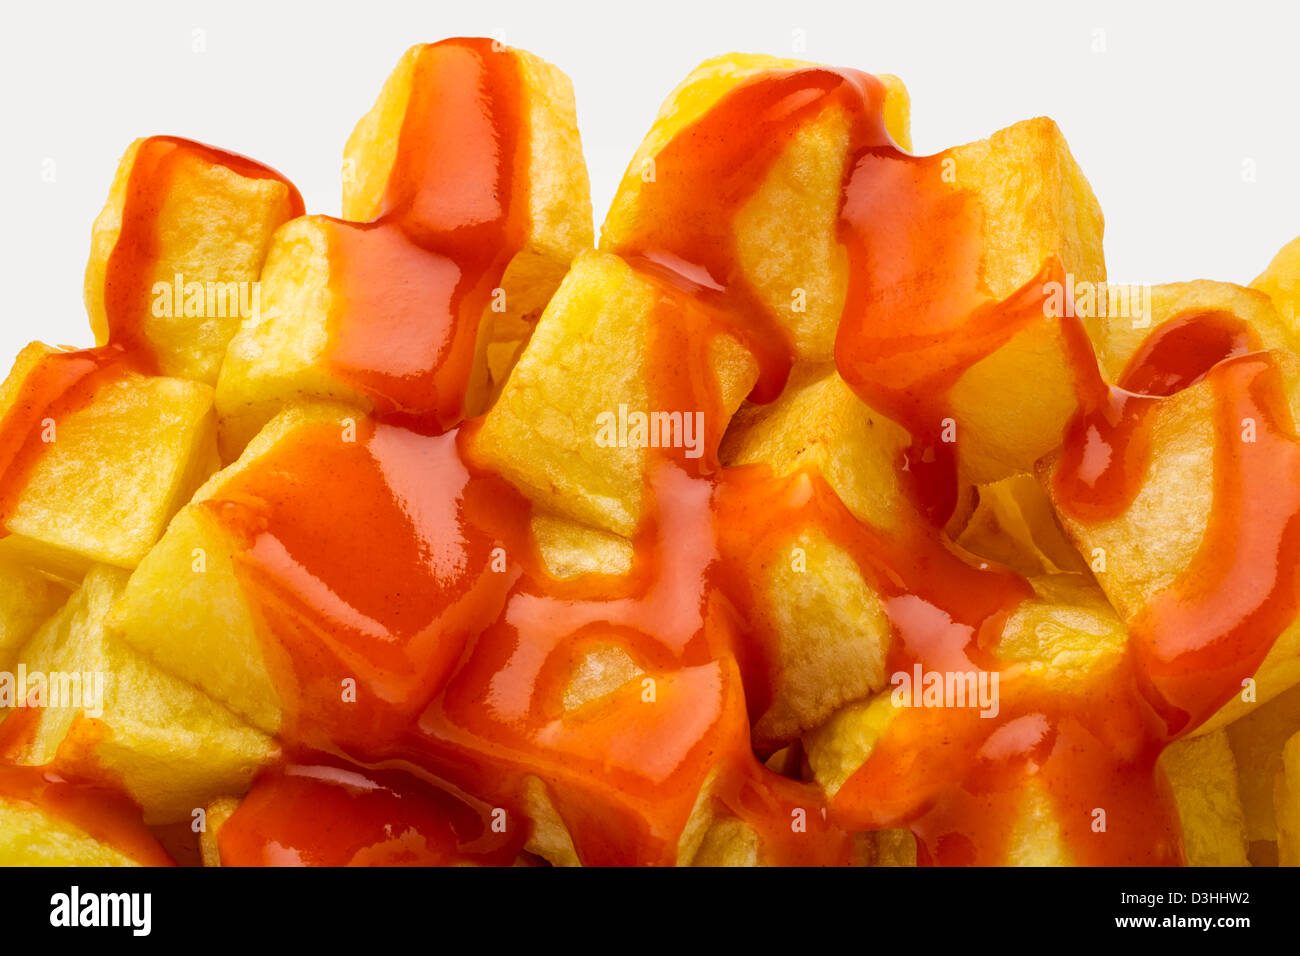 Fried potatoes with spicy sauce Stock Photo